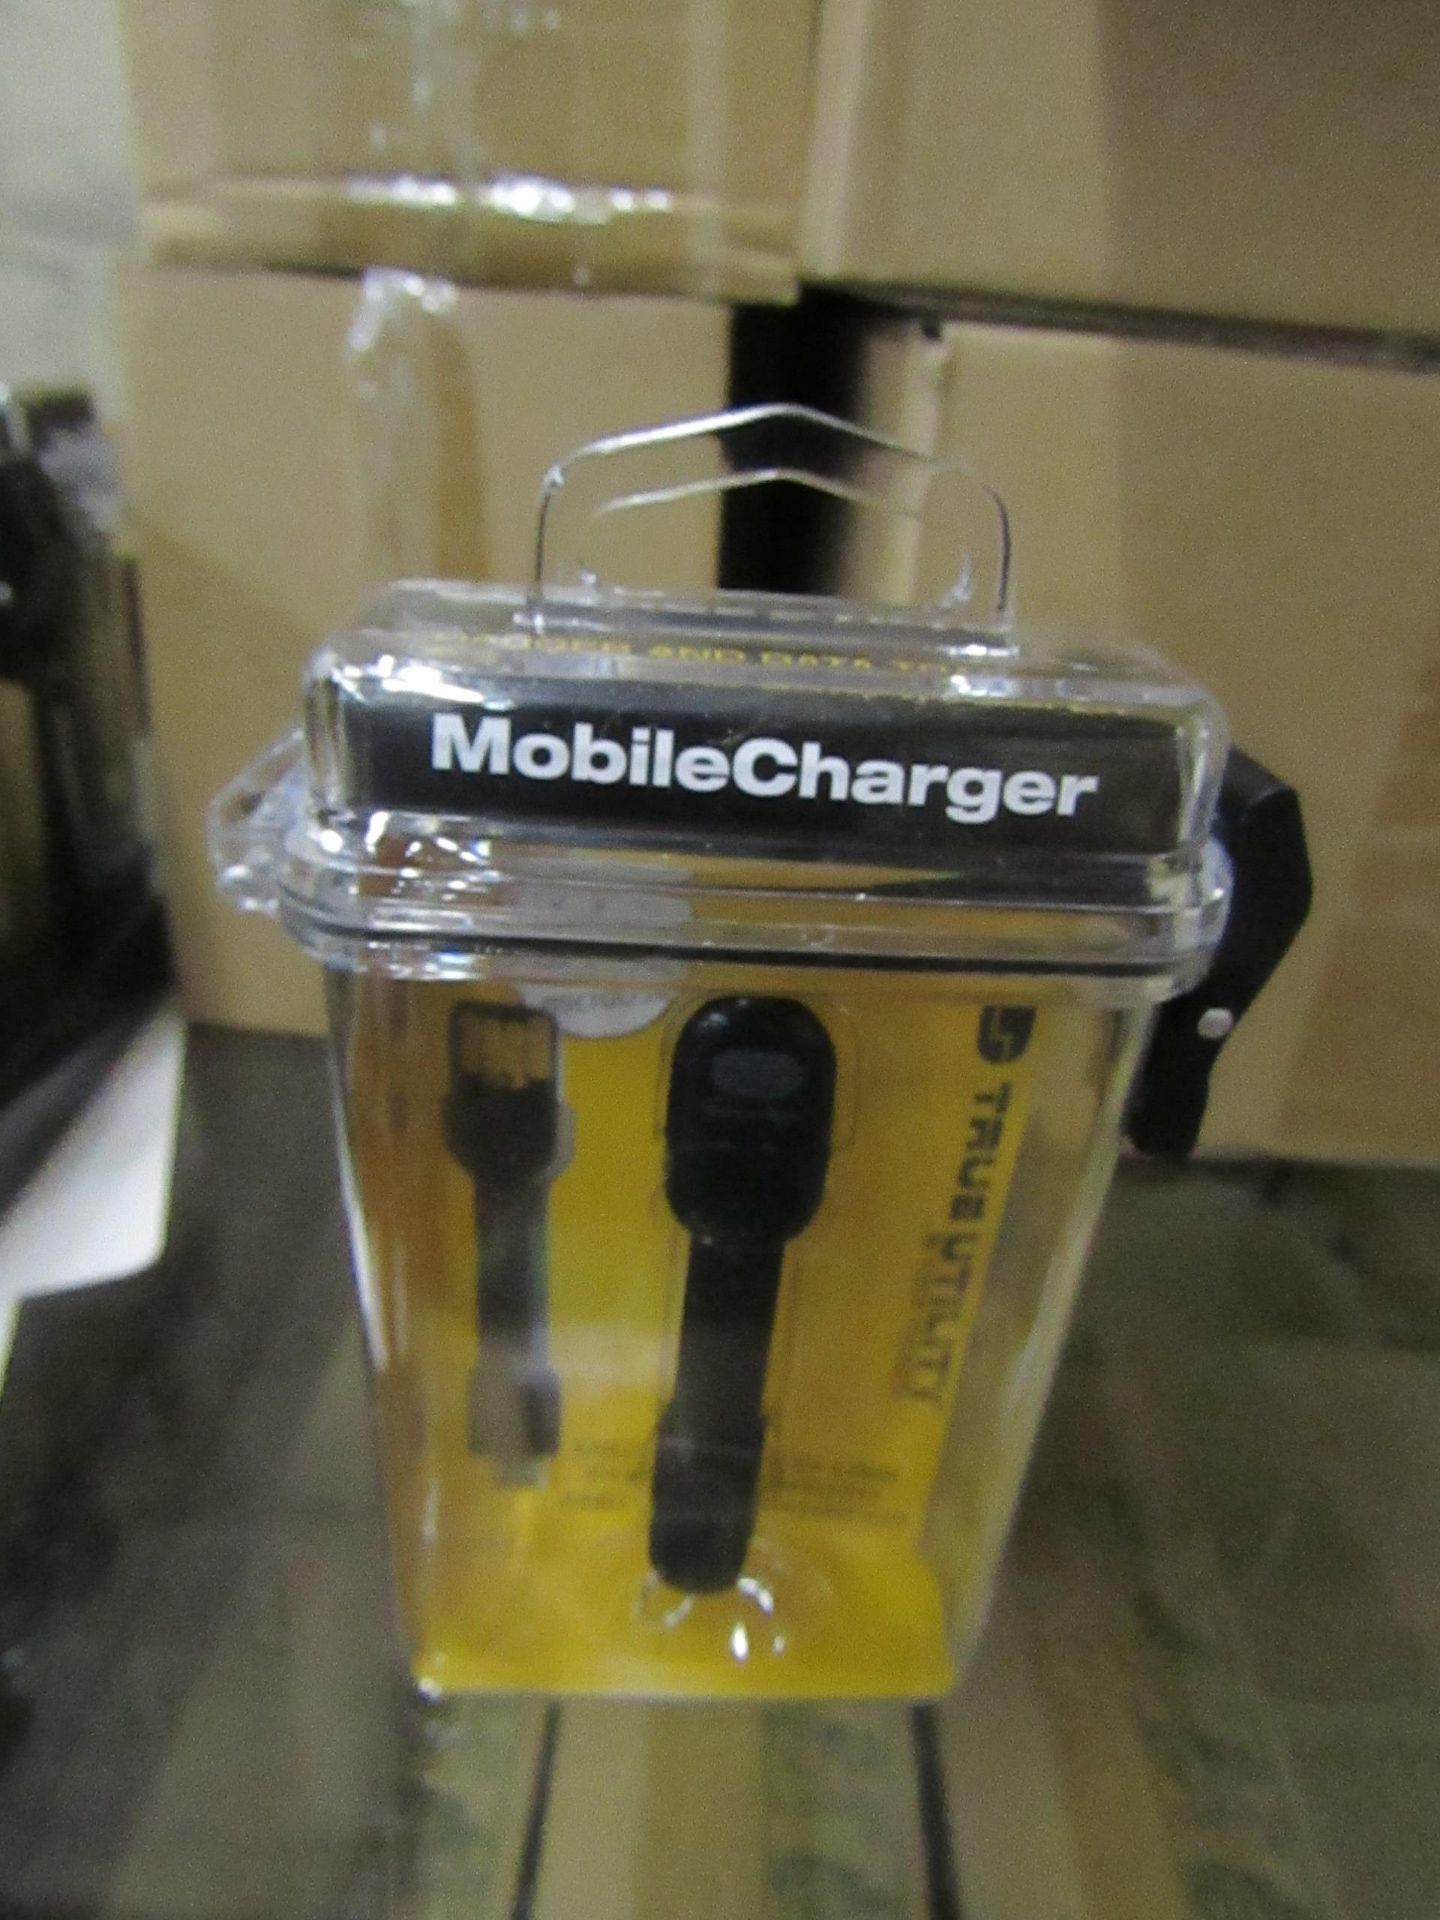 6x True Utility - Mobile Charger keyring cables - Unused & Packaged.